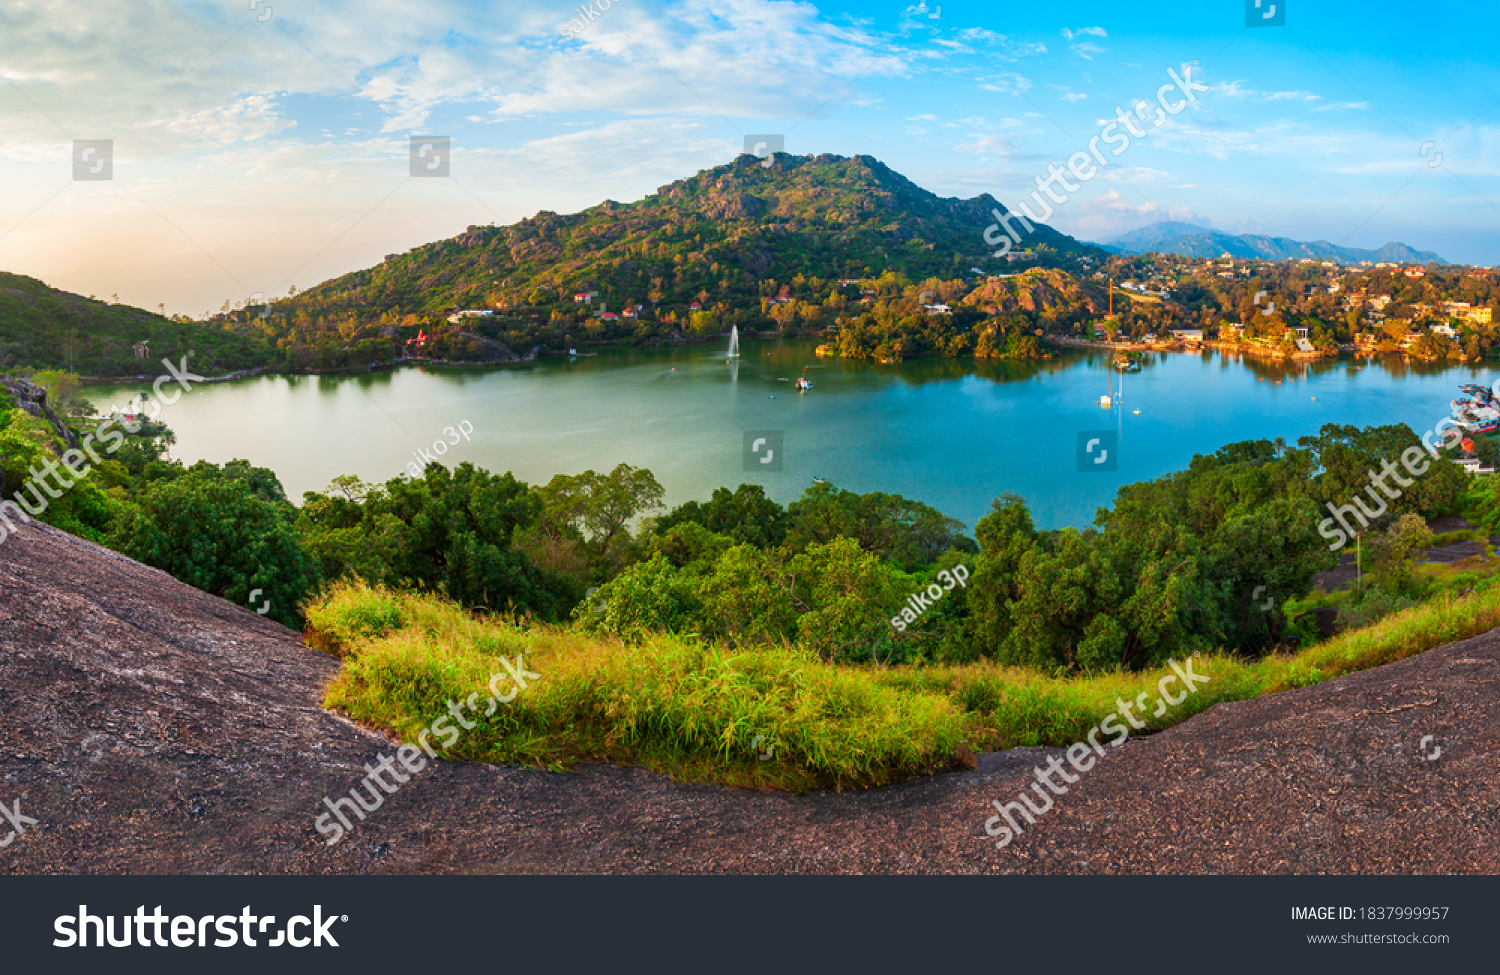 Mount Abu and Nakki lake aerial panoramic view. Mount Abu is a hill station in Rajasthan state, India. #1837999957